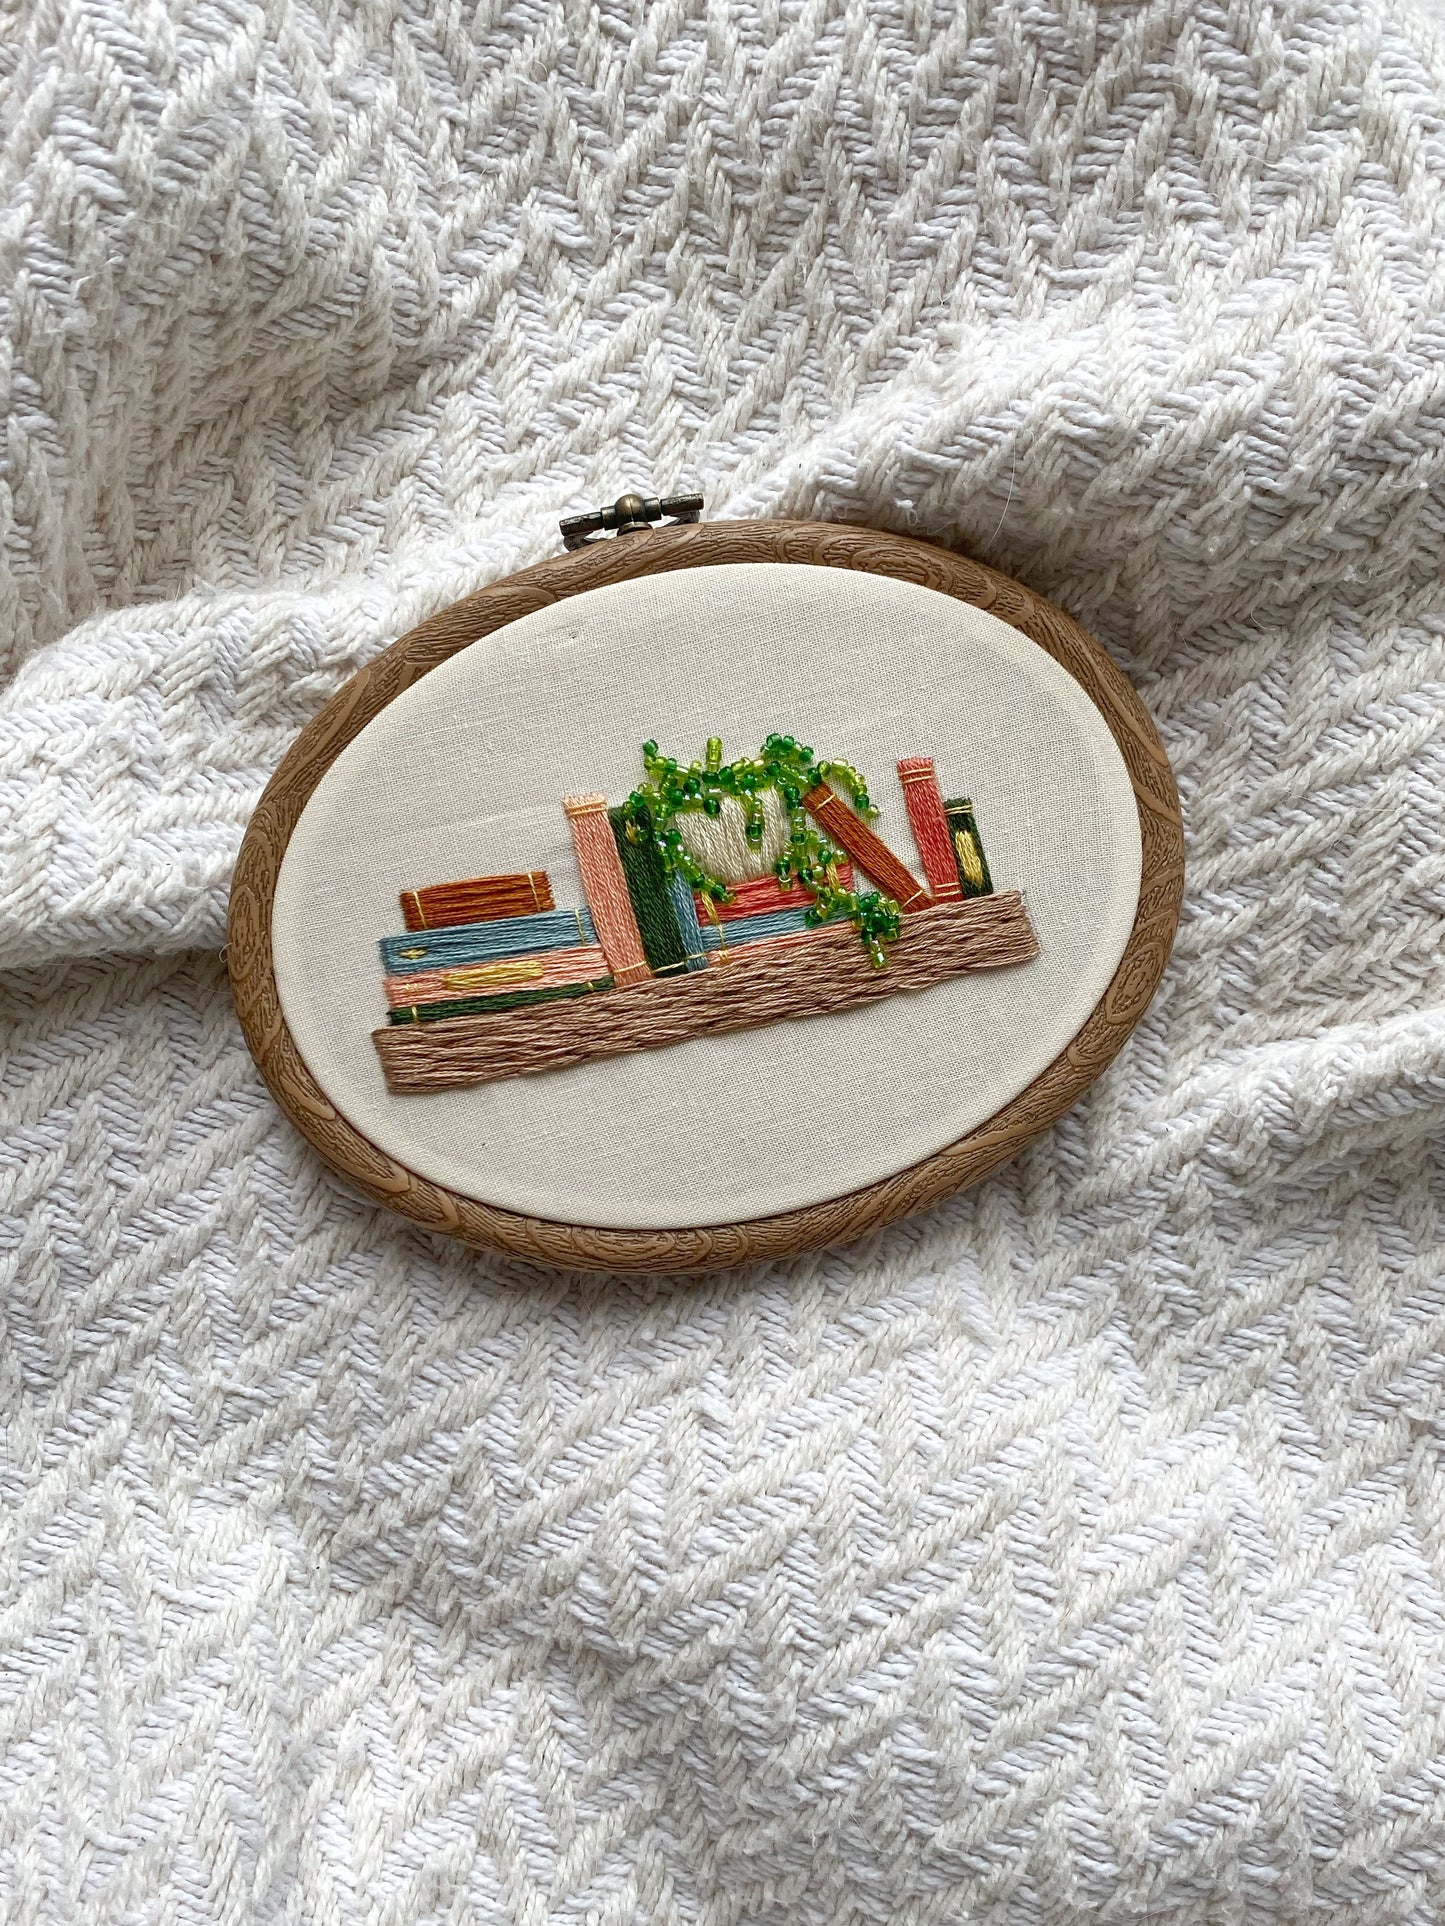 Read Between the Vines || Ready-to-Ship Original Embroidery Hoop Artwork